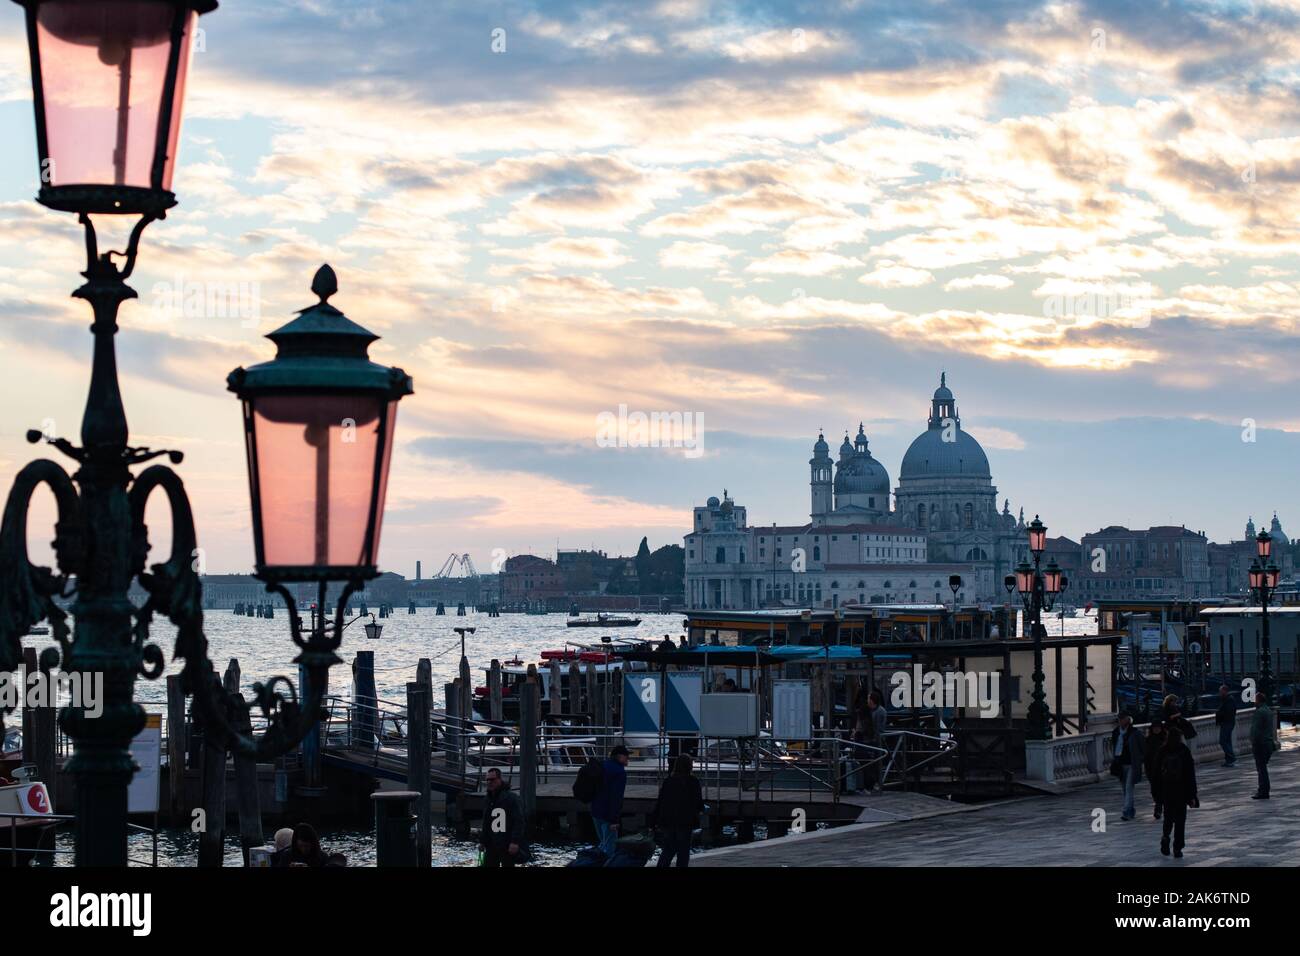 San Zaccaria, san marco, st.marks square, dock at sunset dusk, night time, evening venice italy jetty Stock Photo